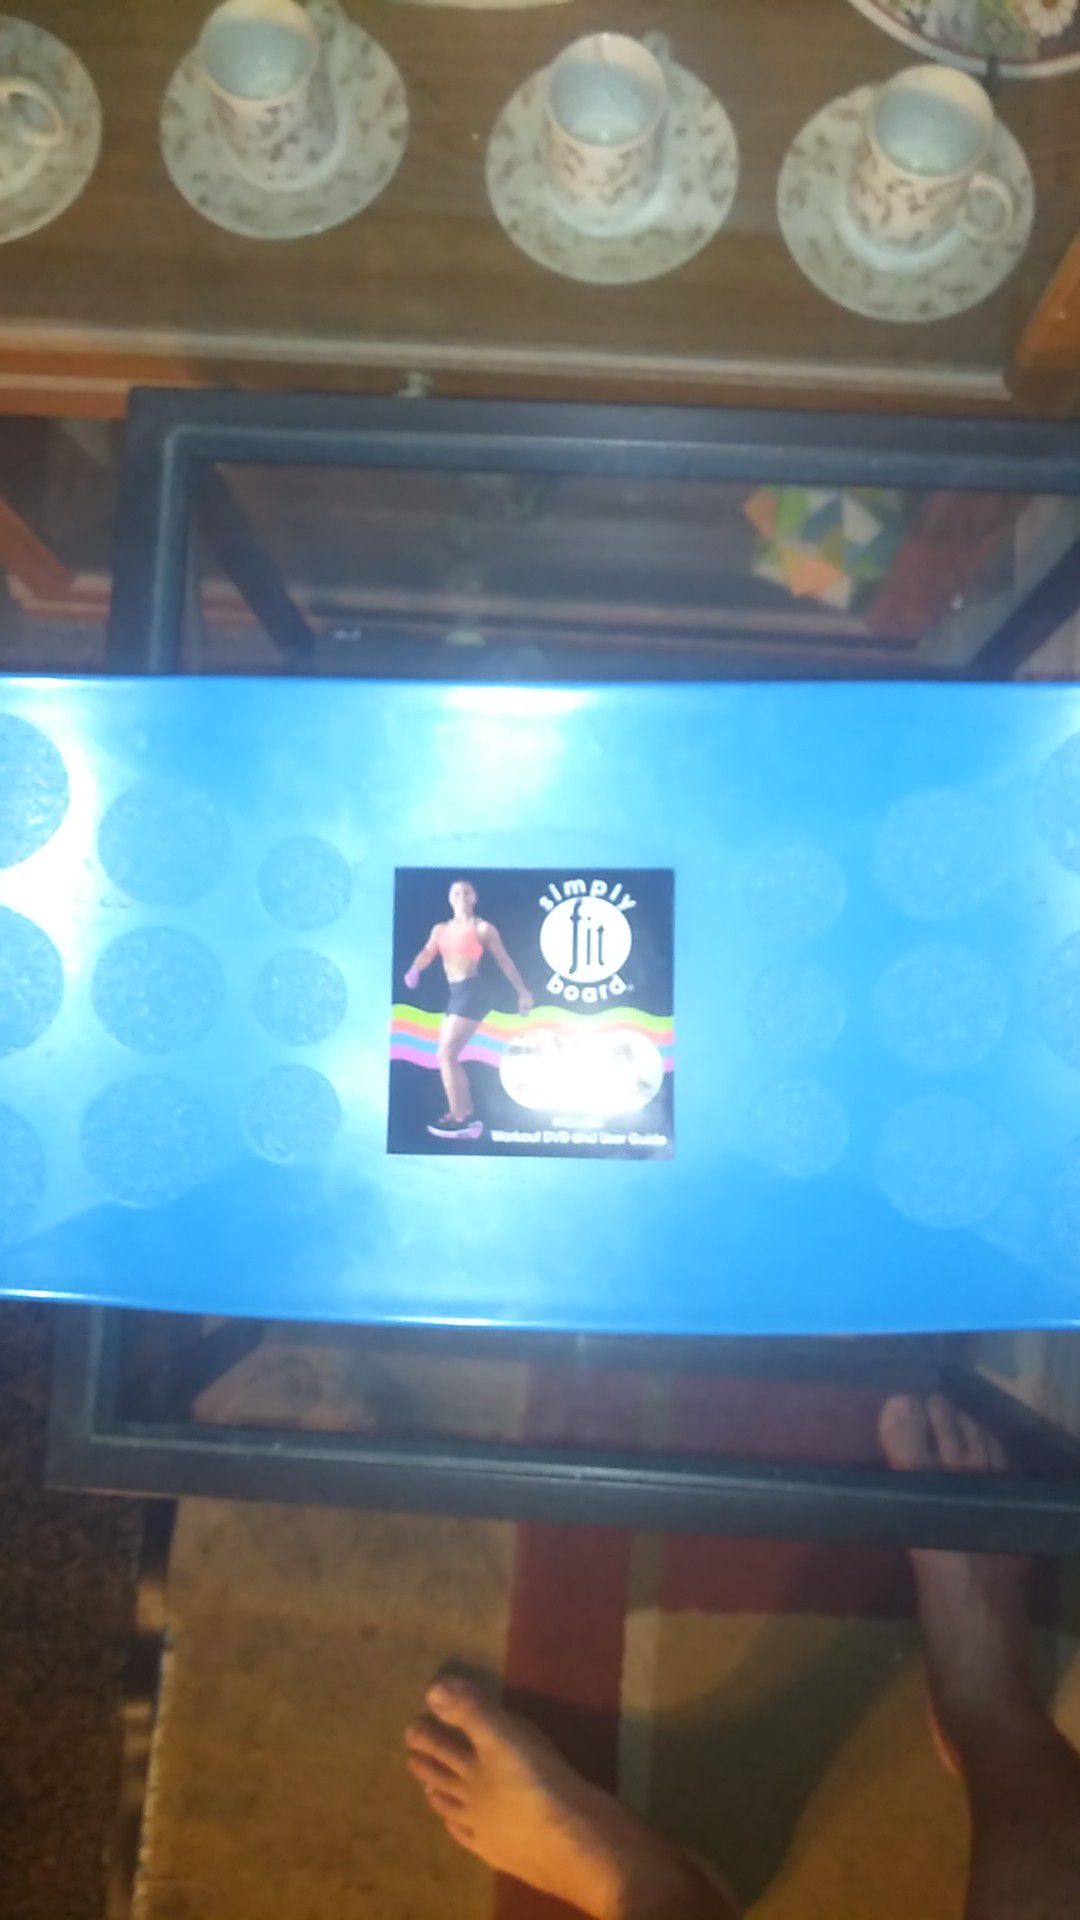 Exercise board with DVD having